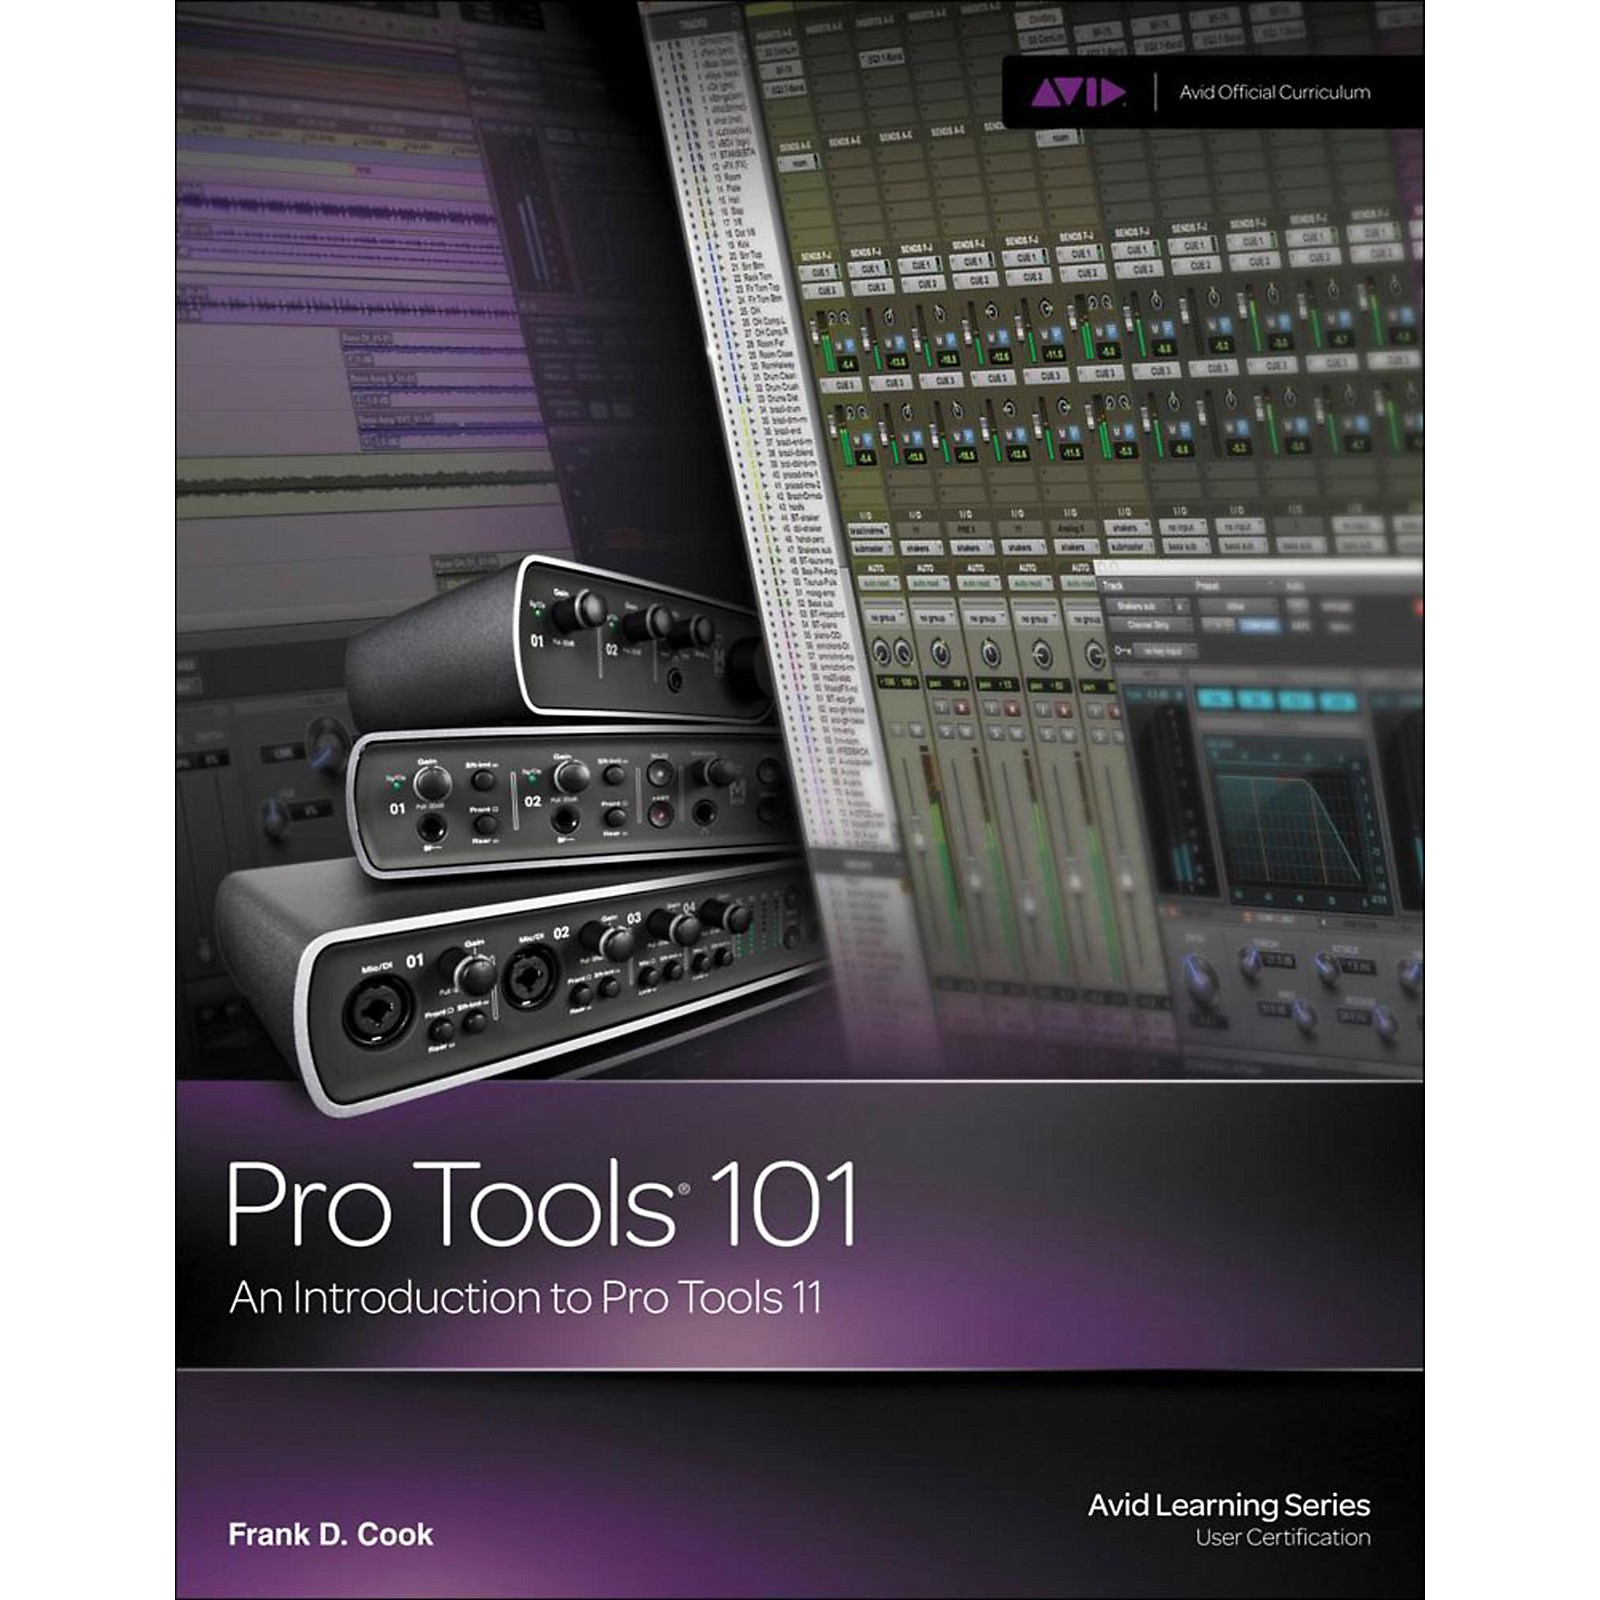 complete exercise 4 from the pro tools 101 book